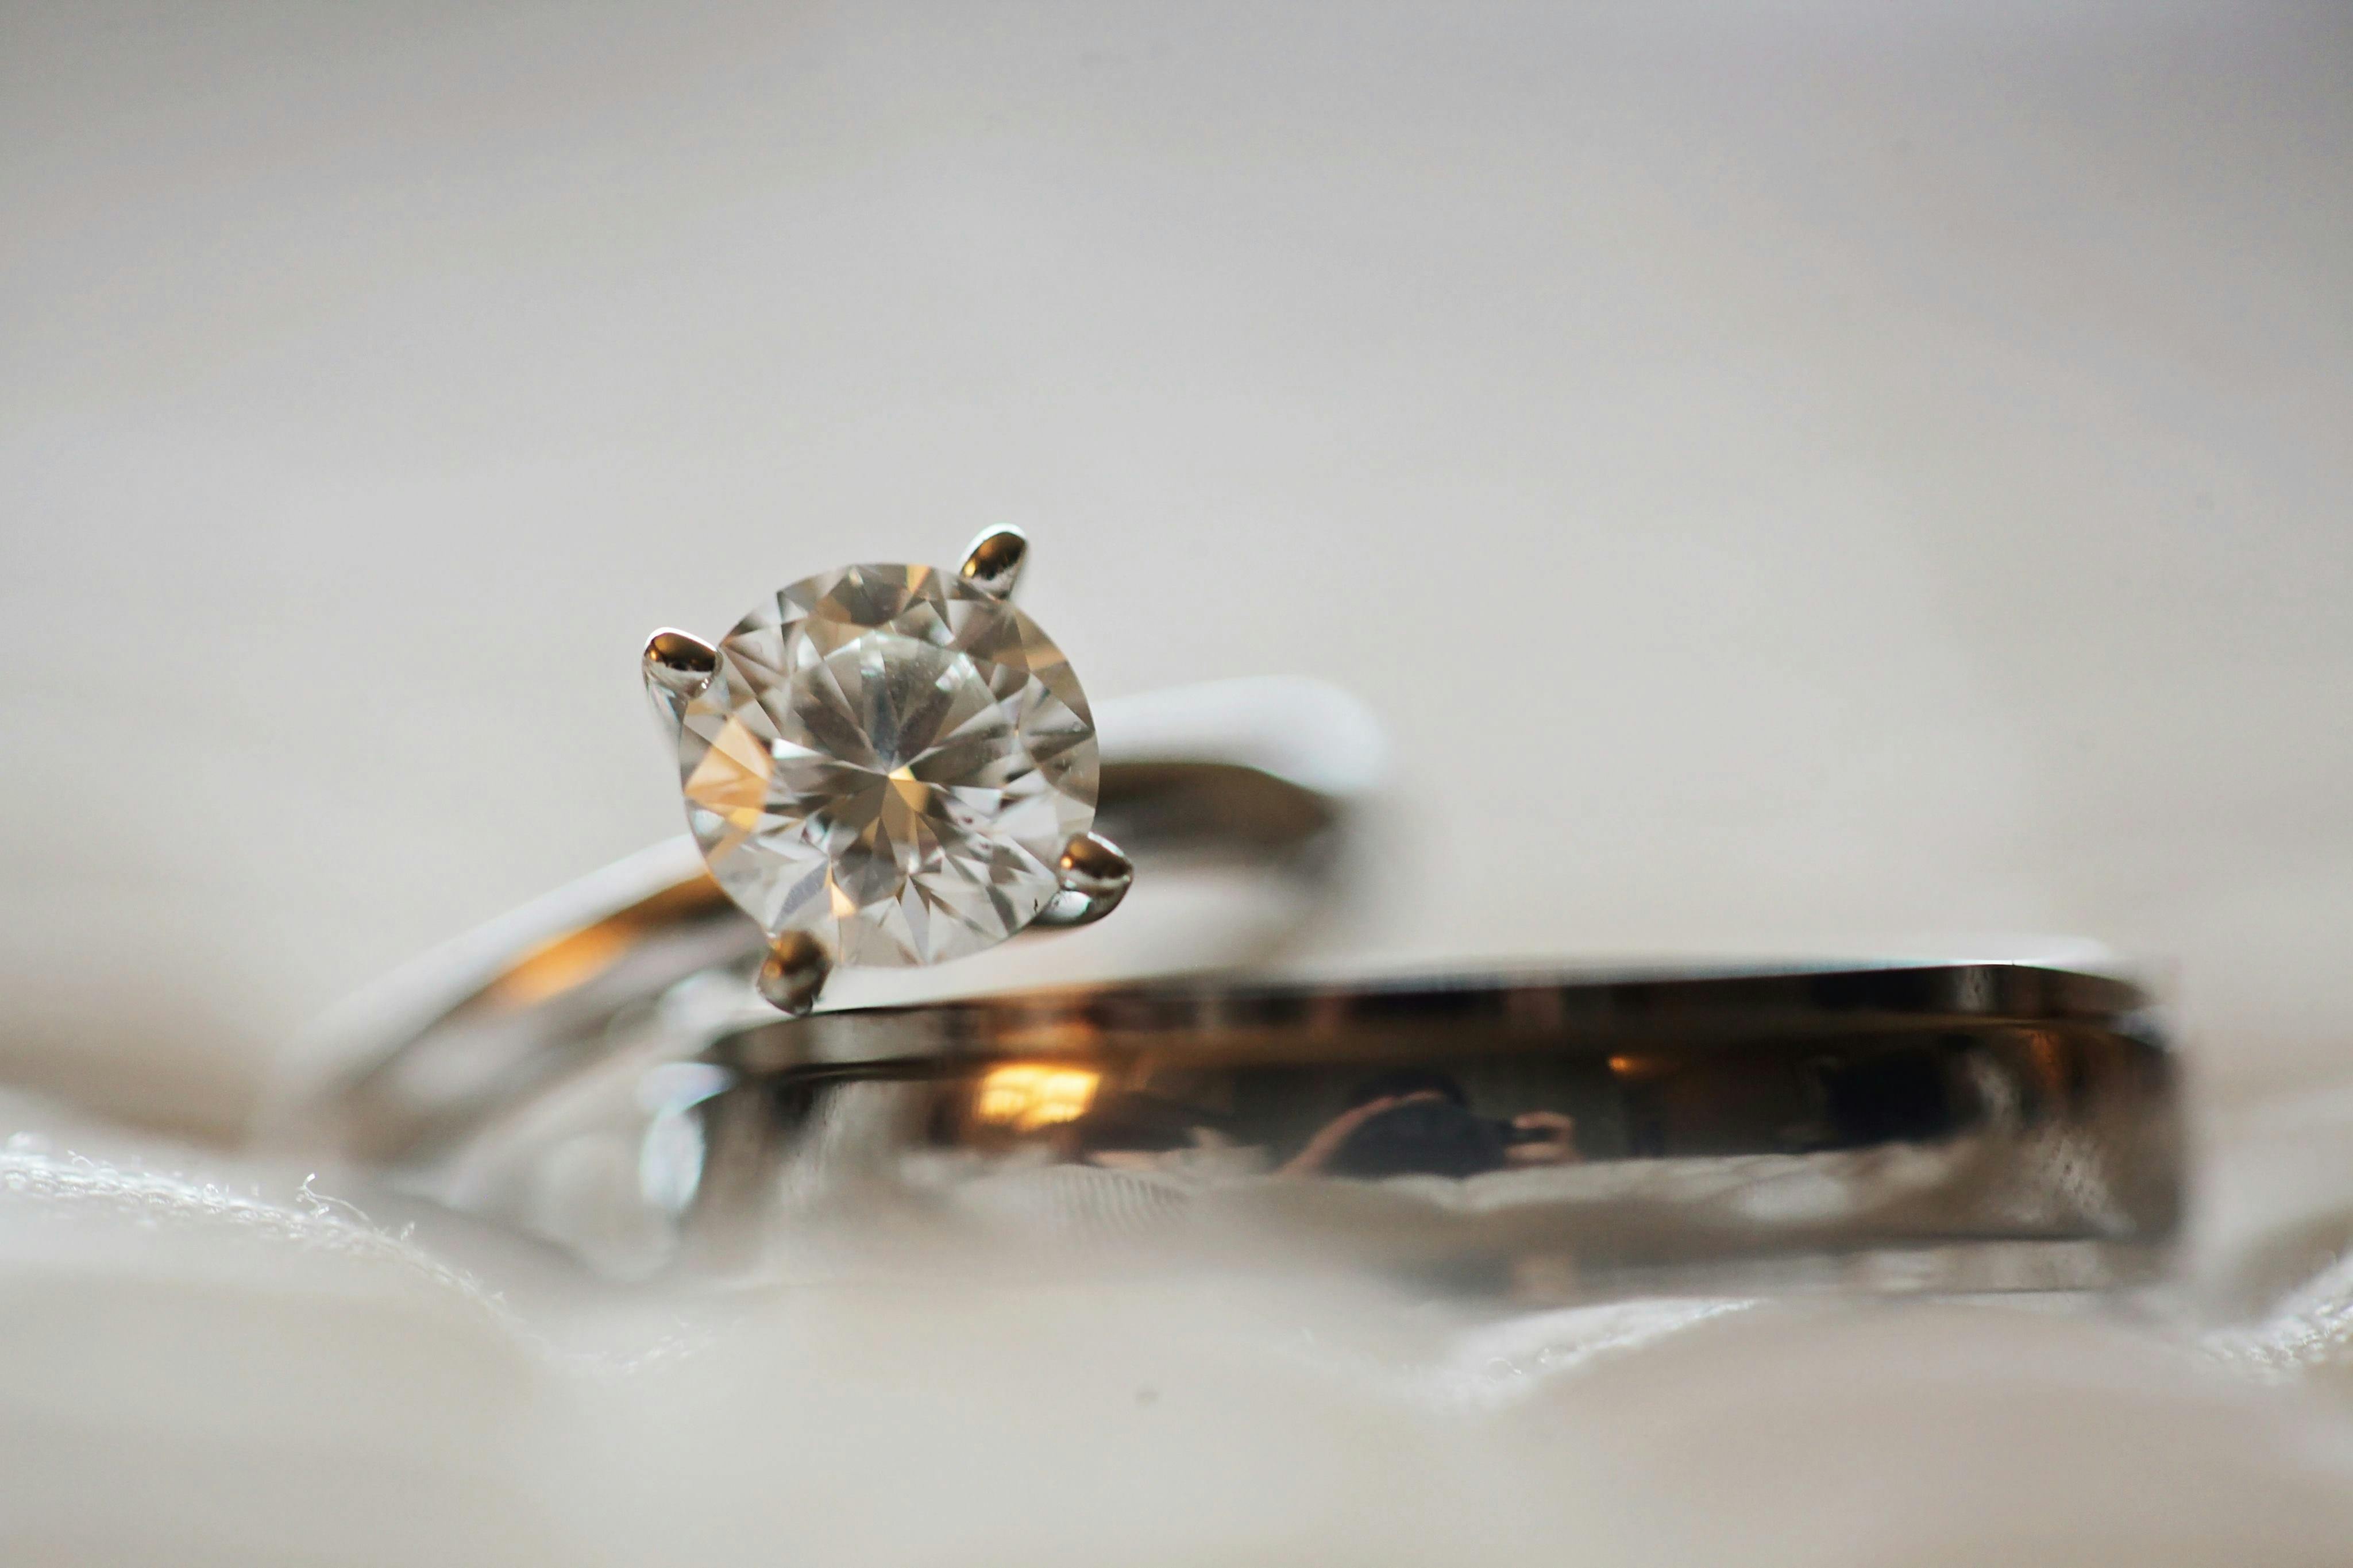 Pony up that engagement ring in Lexington, KY - Where to pop the question?